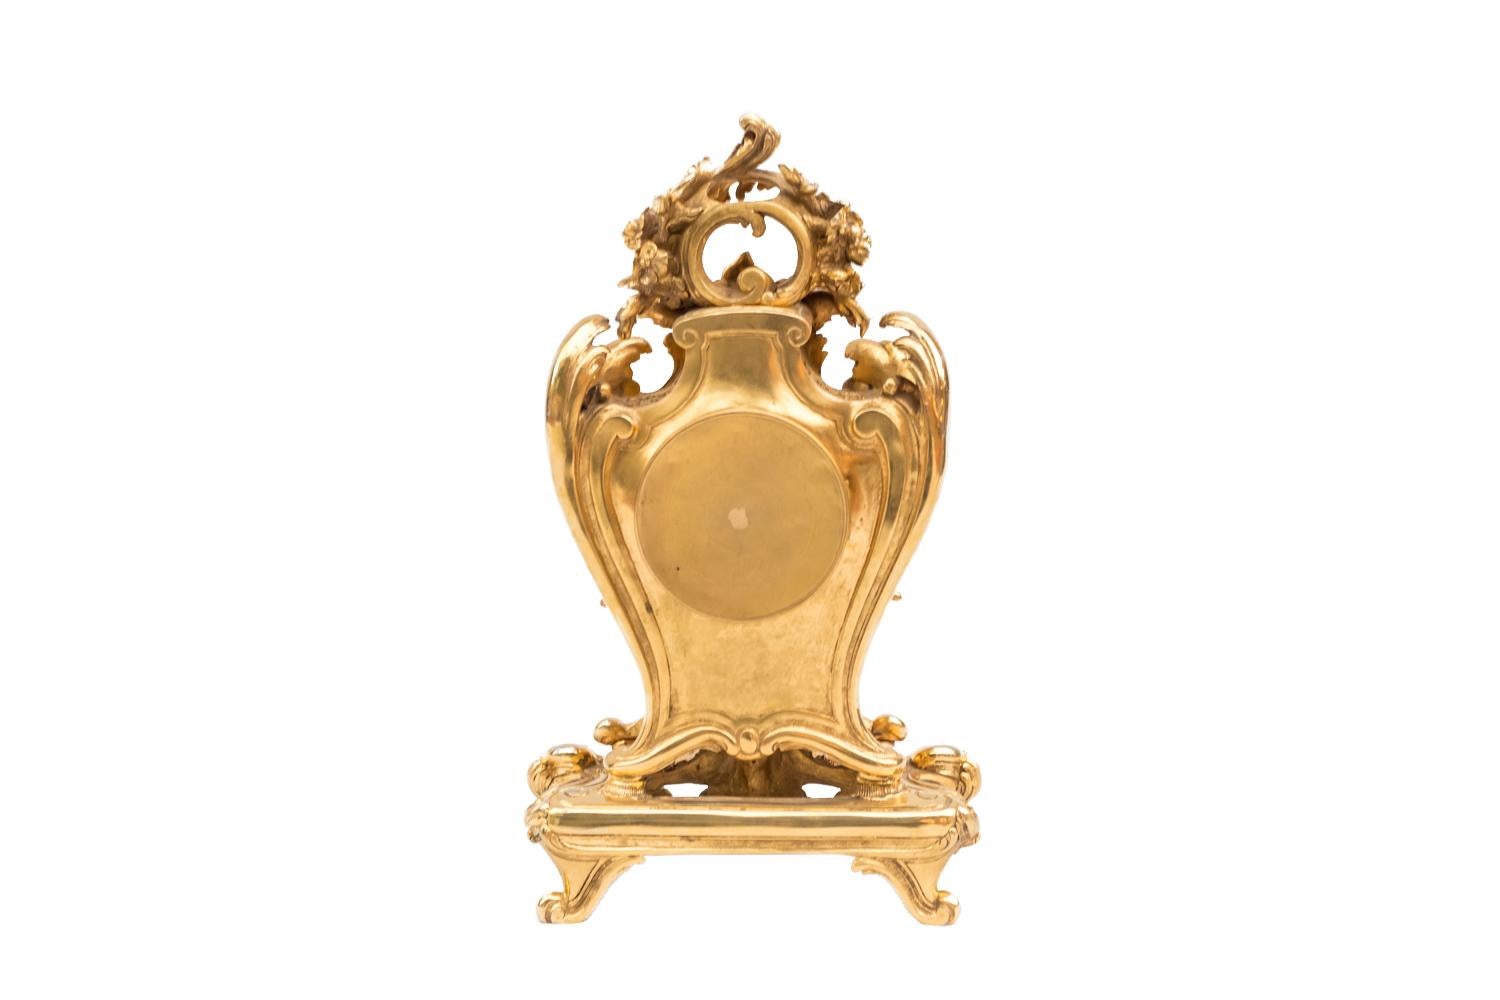 Richond, Rocaille Style Clock in Gilt Bronze, Before 1873 (Rokoko)